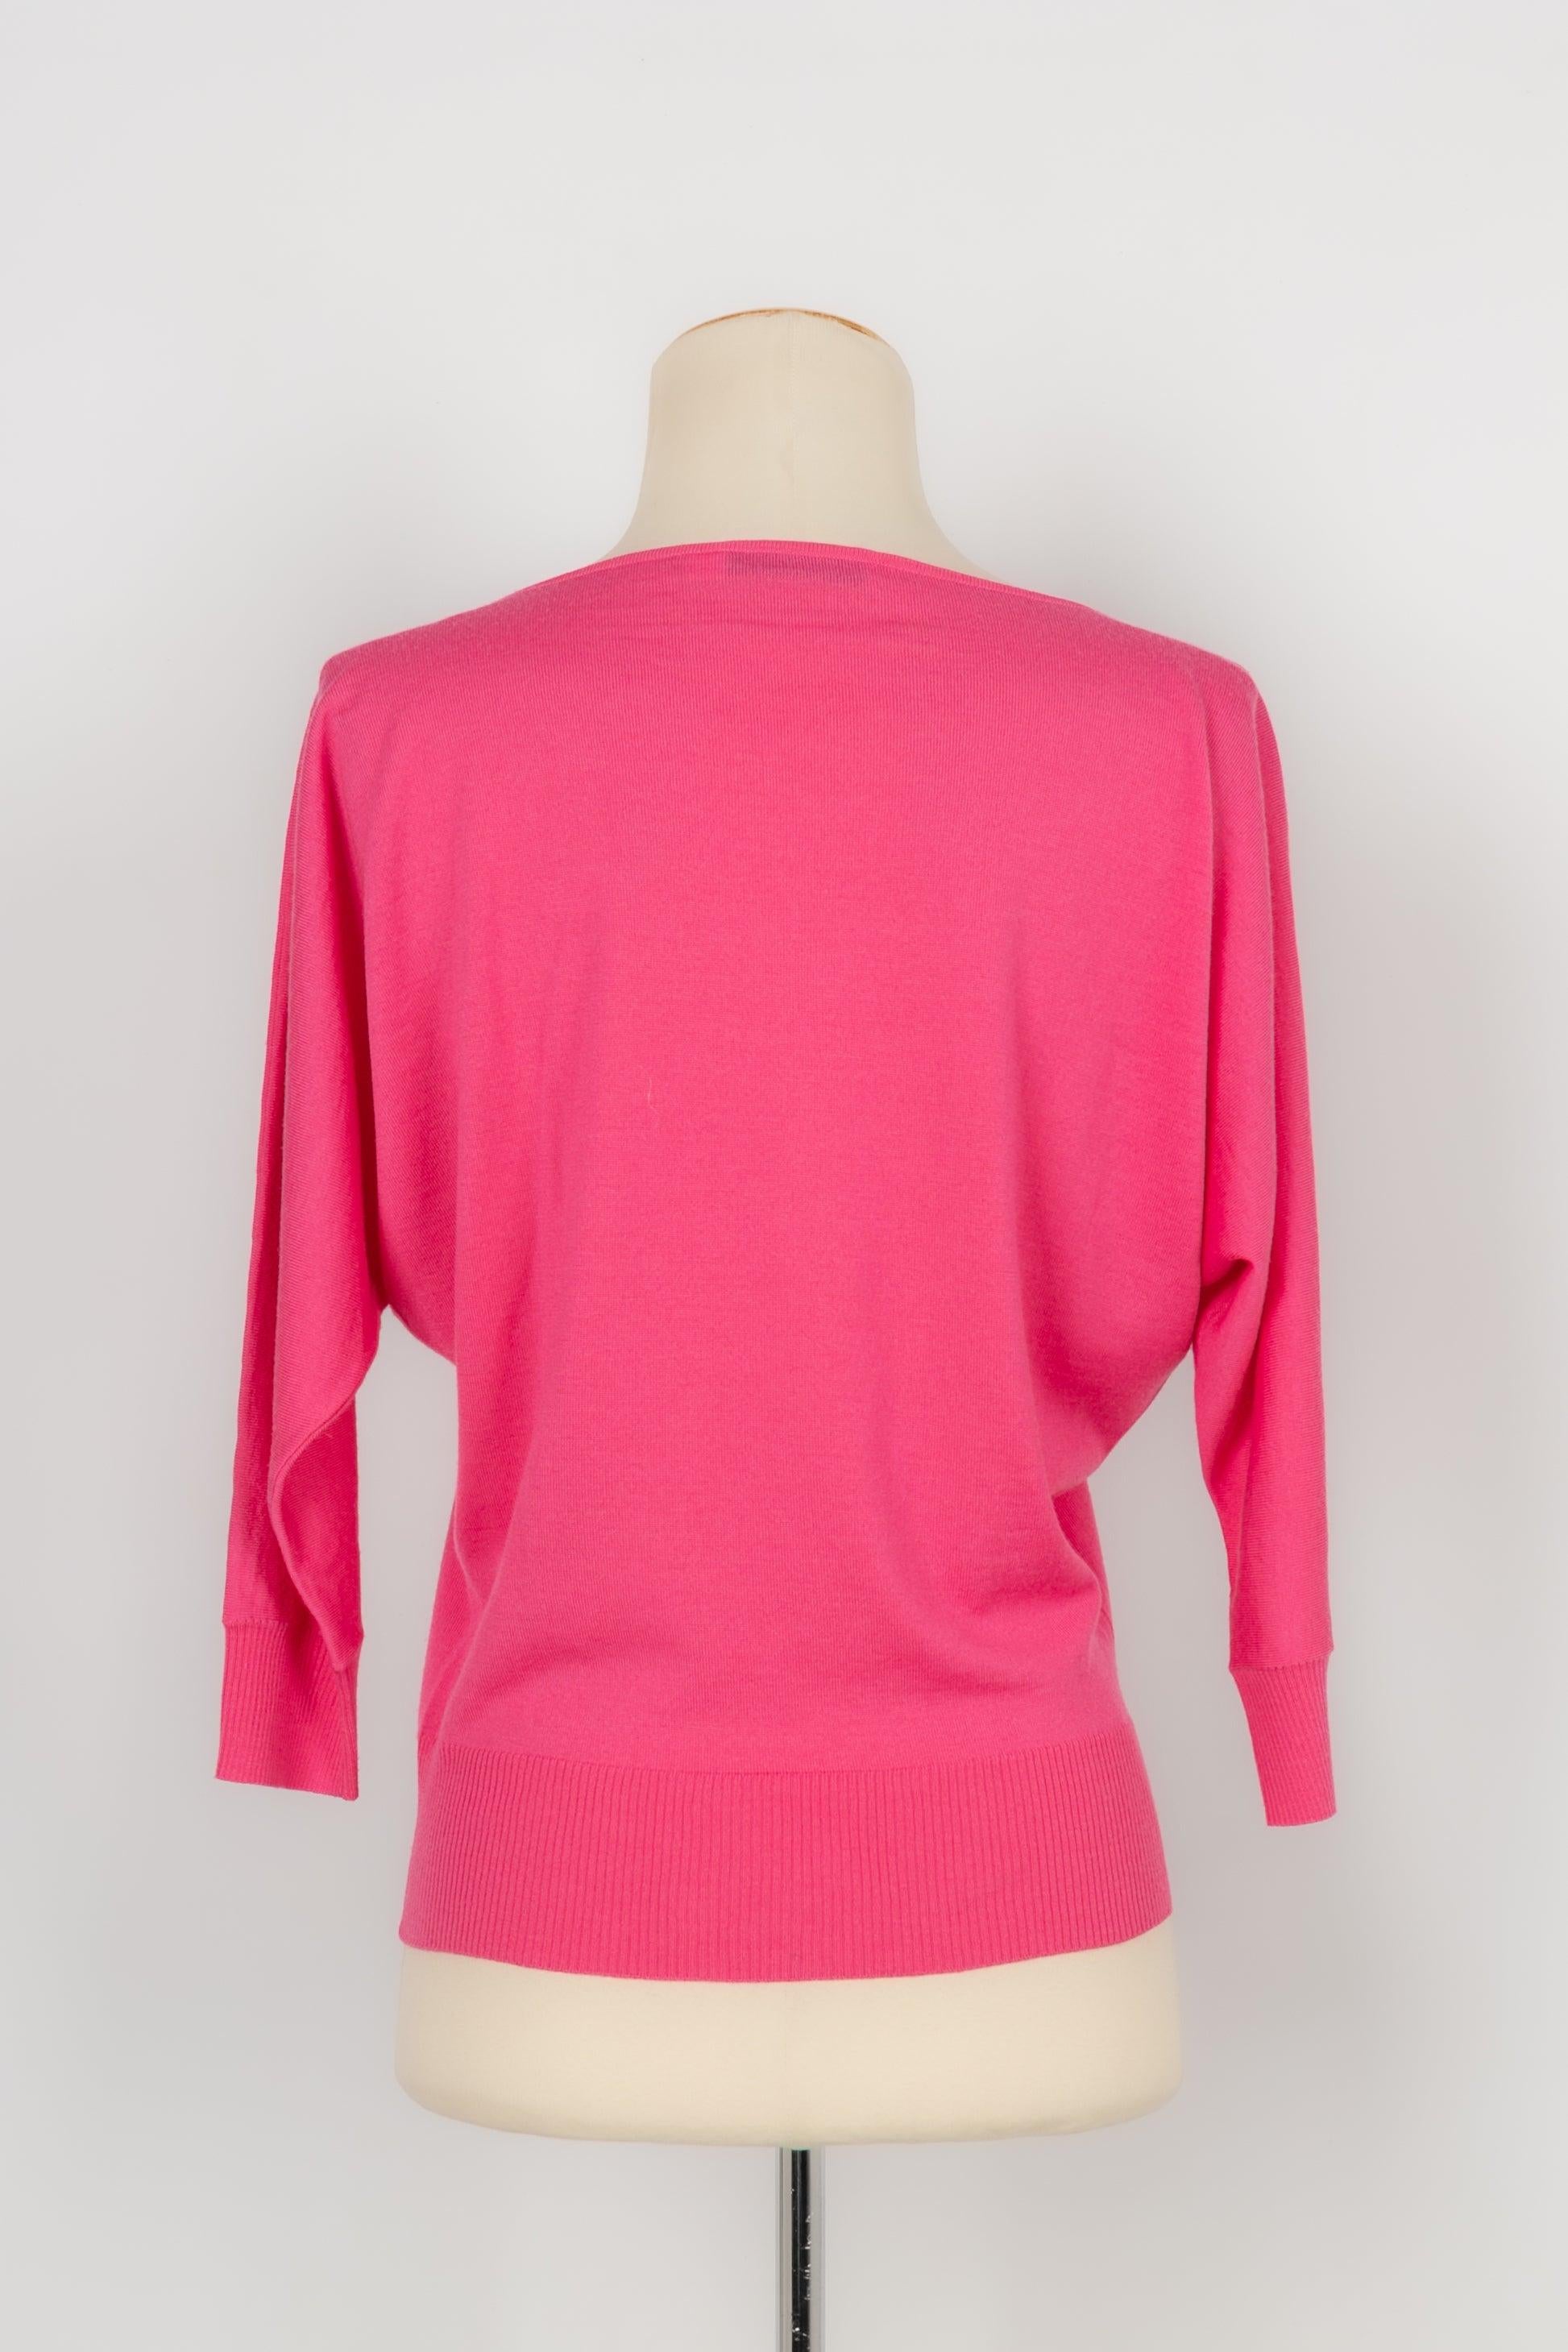 Dior Pink Wool Tiny Sweater, 2008 In Excellent Condition For Sale In SAINT-OUEN-SUR-SEINE, FR